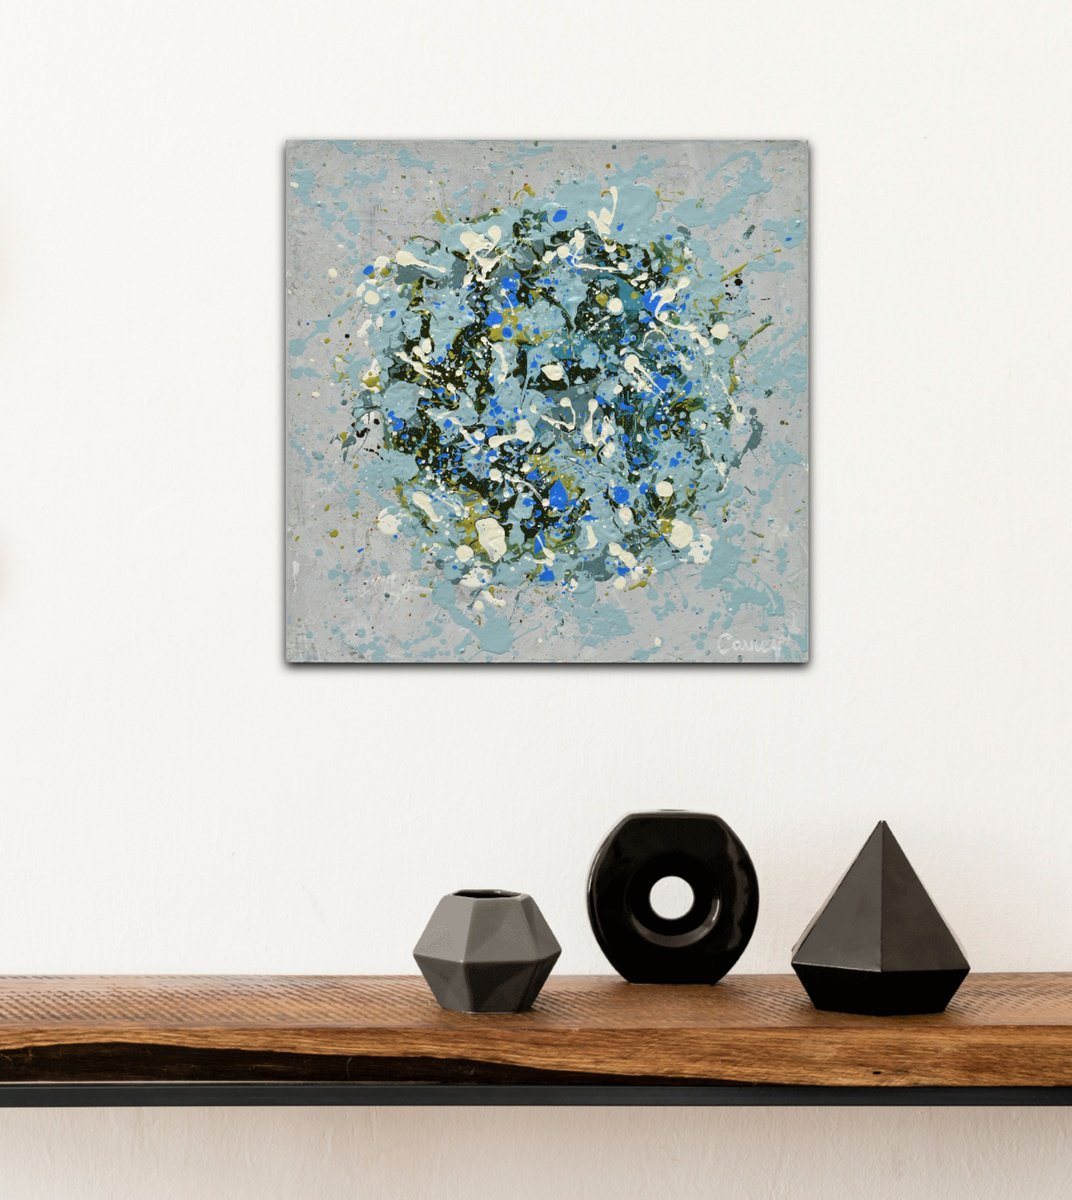 Petal Burst 53 - Small Abstract Painting by Carney